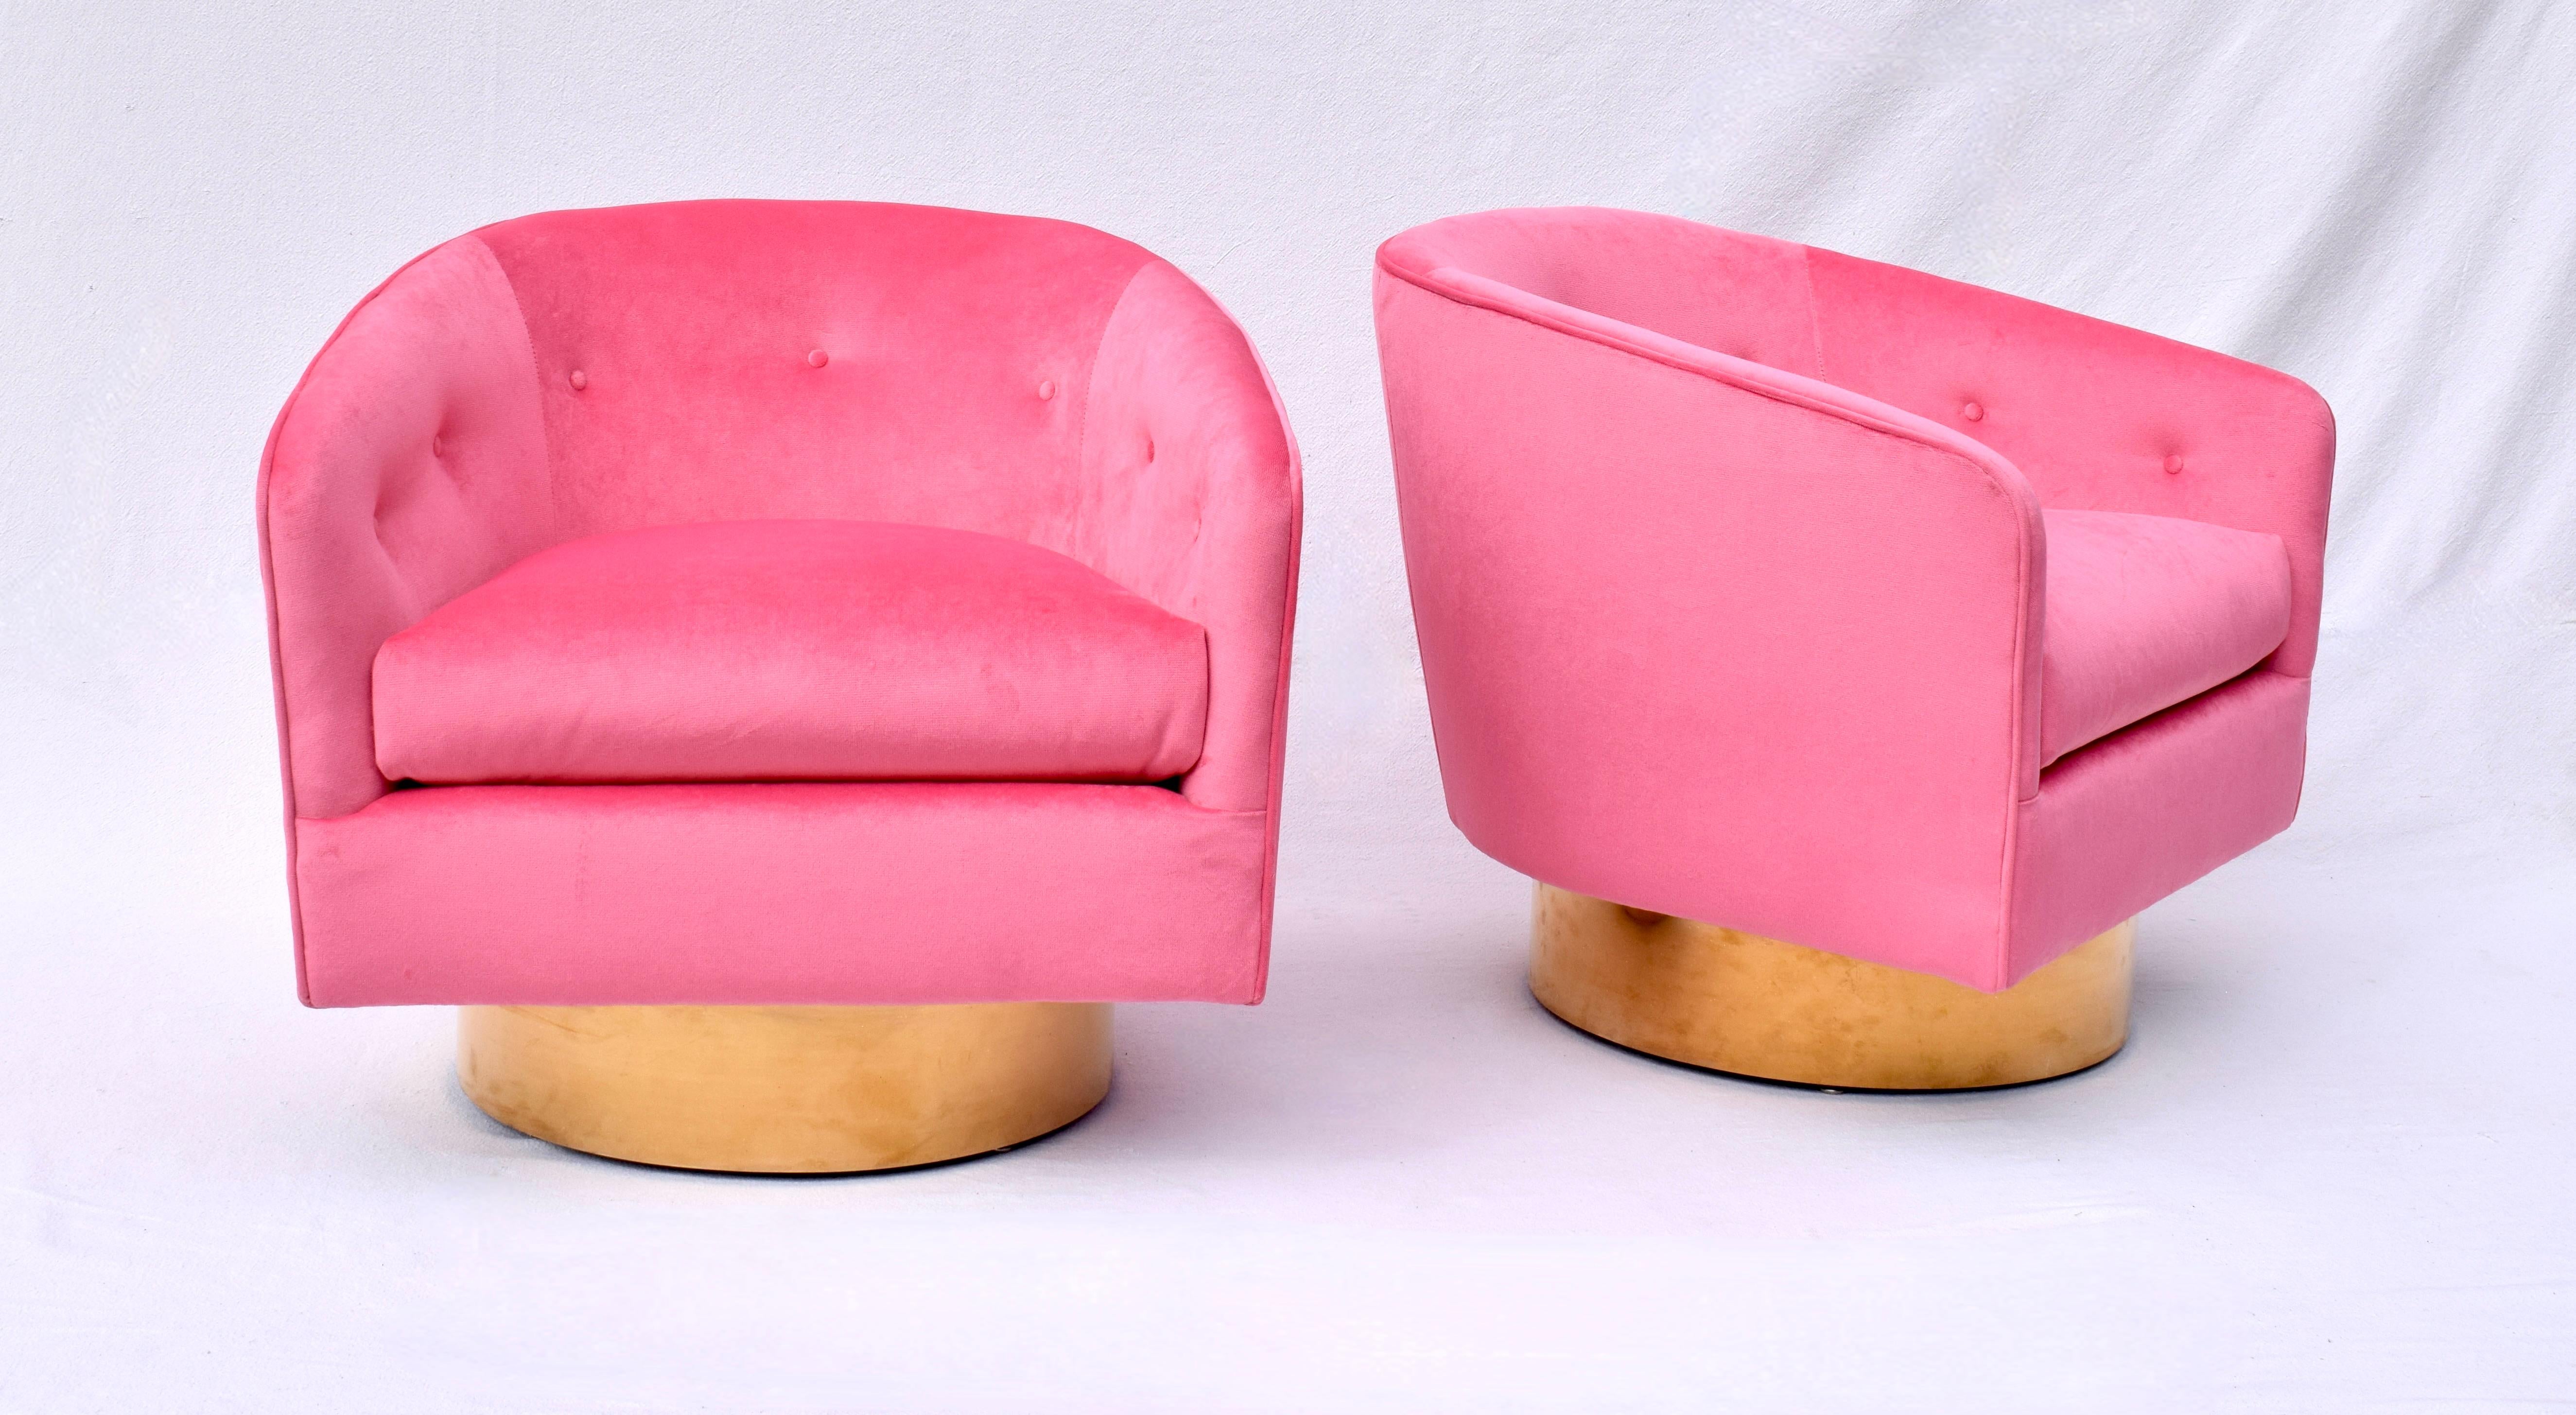 Outstanding pair of vintage Milo Baughman tub, barrel, swivel armchairs, newly upholstered in a bright pink velvet with new customized gold brass platform bases. Exquisite, ready for use.